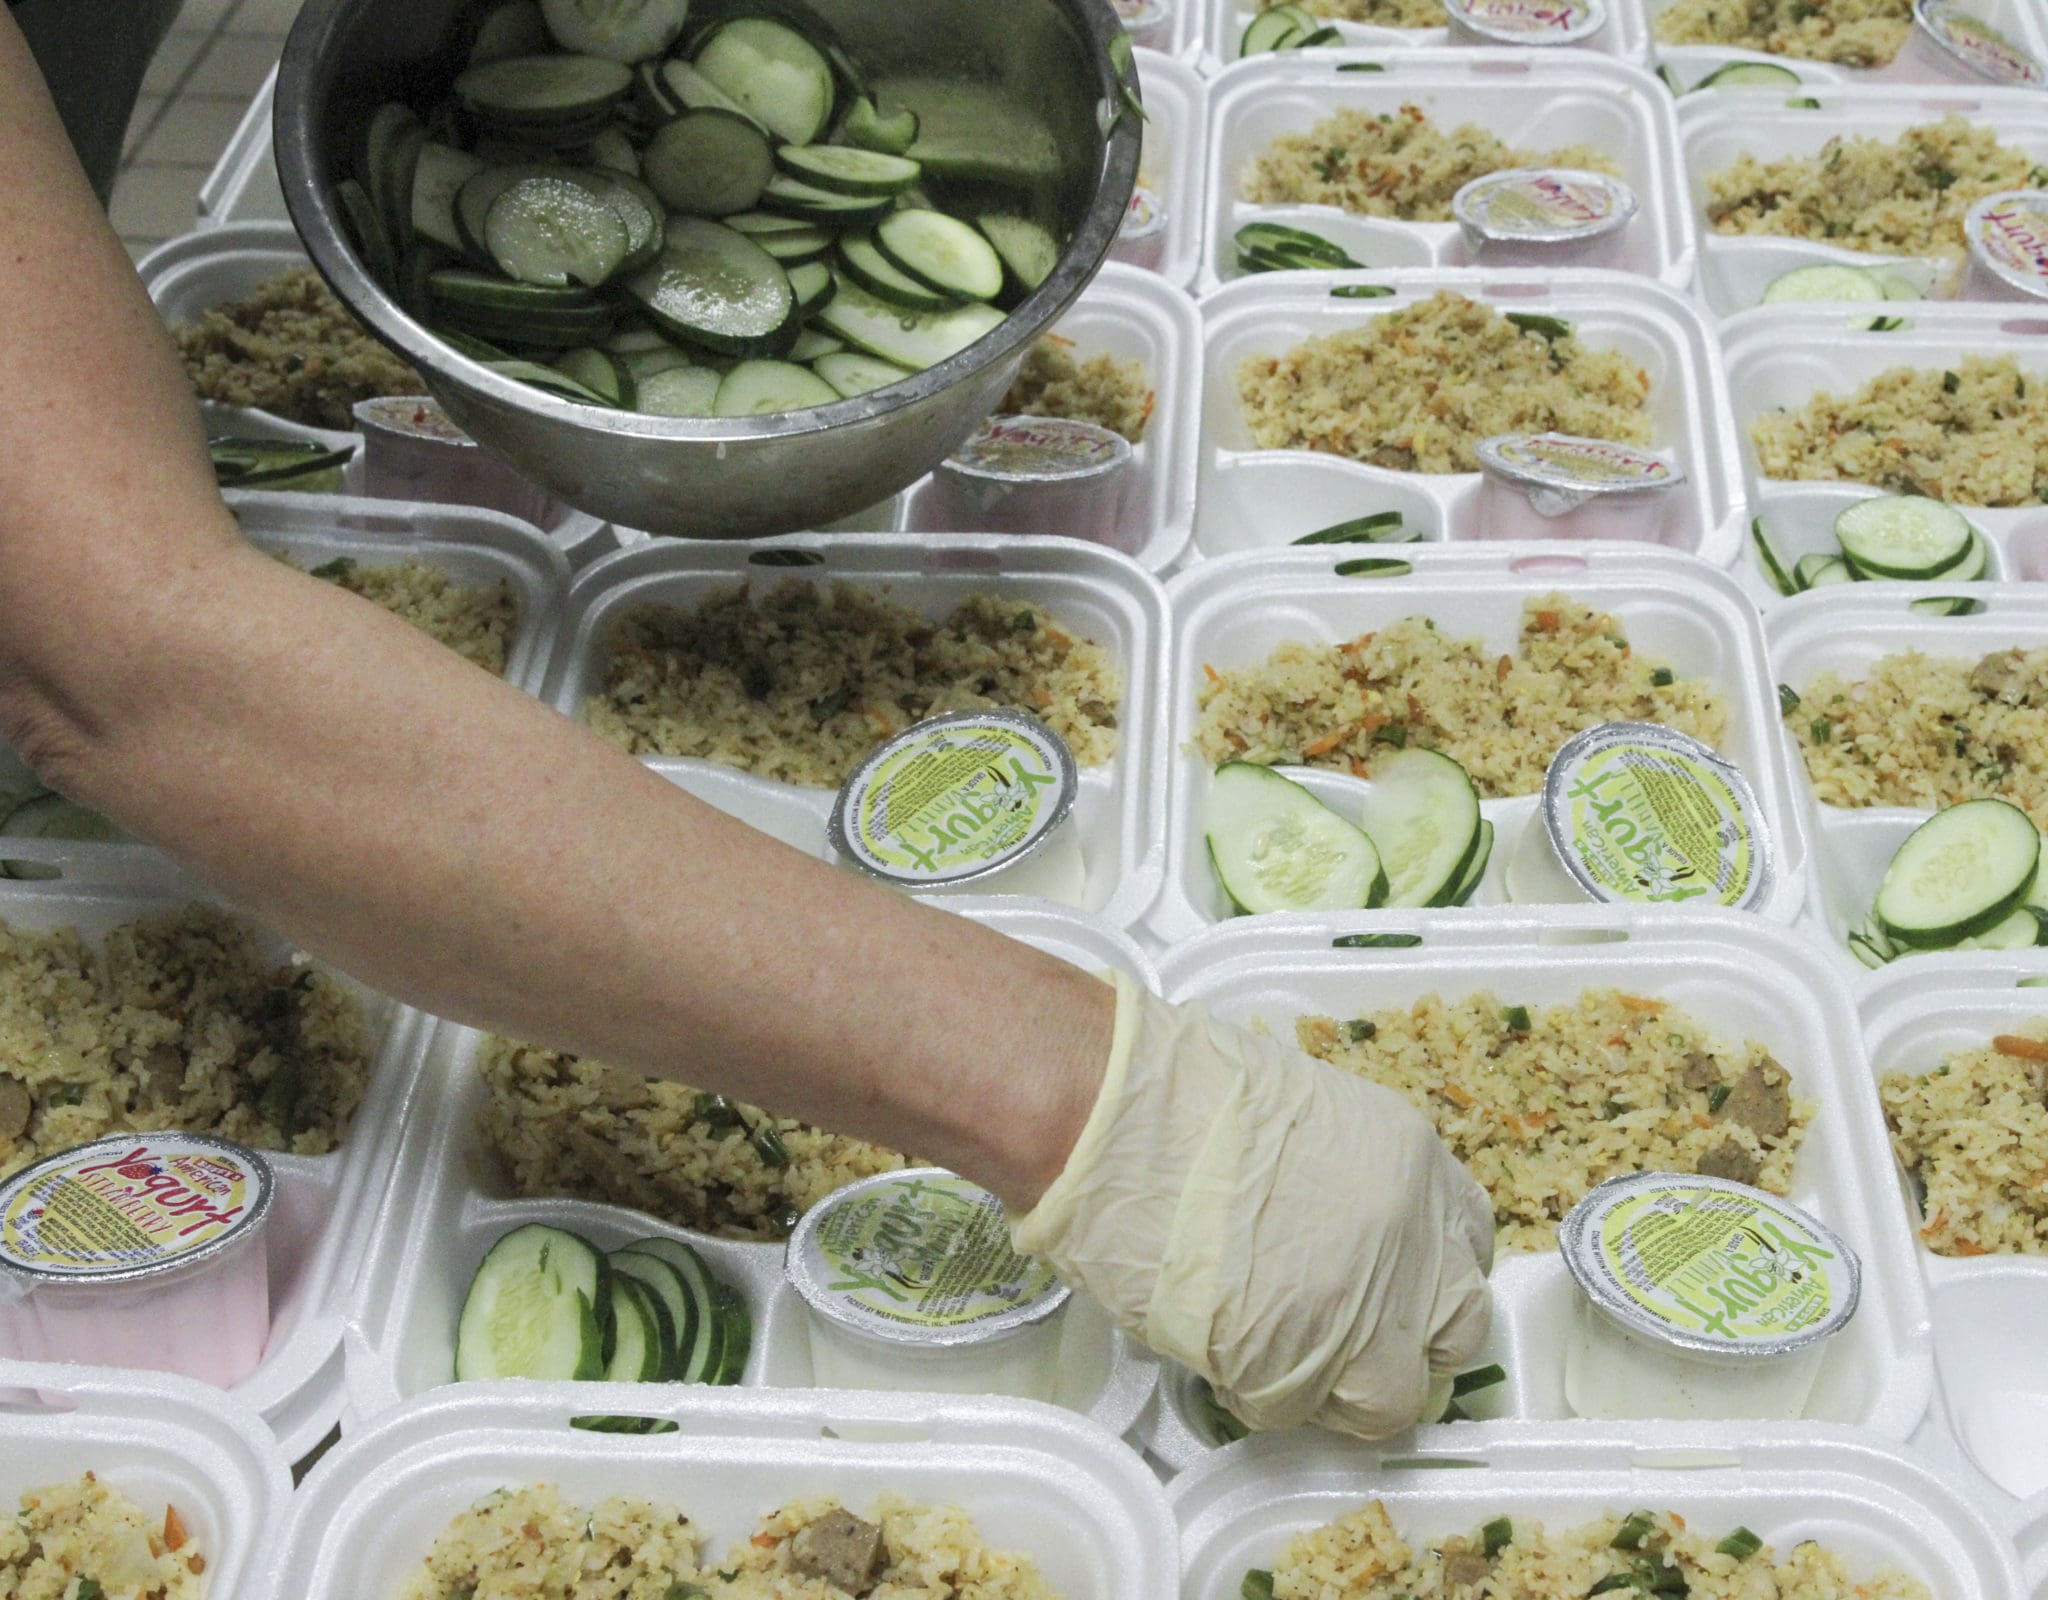 A volunteer places sliced cucumbers on the 500 plates being prepared for delivery to the homeless in the remote areas of three counties (Gwinnett, DeKalb and Fulton), encompassing more than 12 municipalities. Photo By Michael Alexander